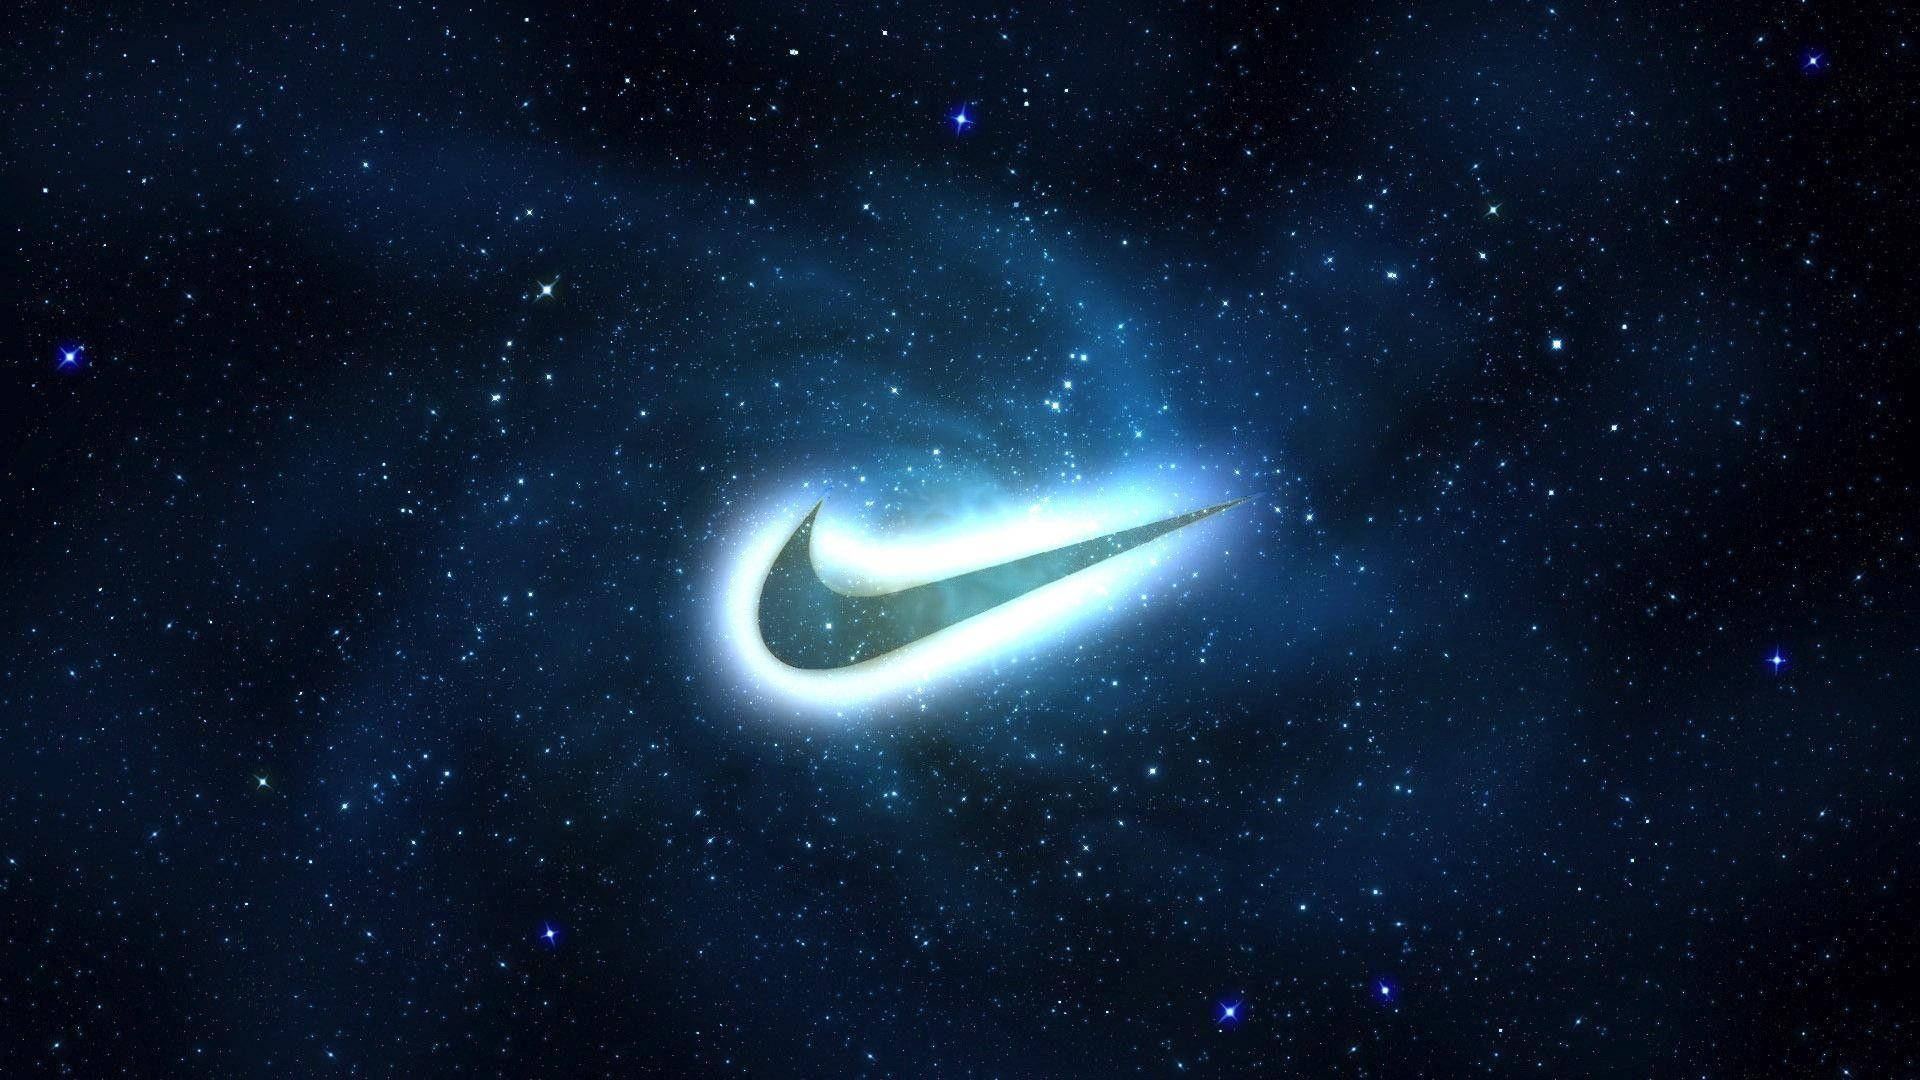 Free Cool Nike Wallpaper Downloads, [100+] Cool Nike Wallpapers for FREE |  